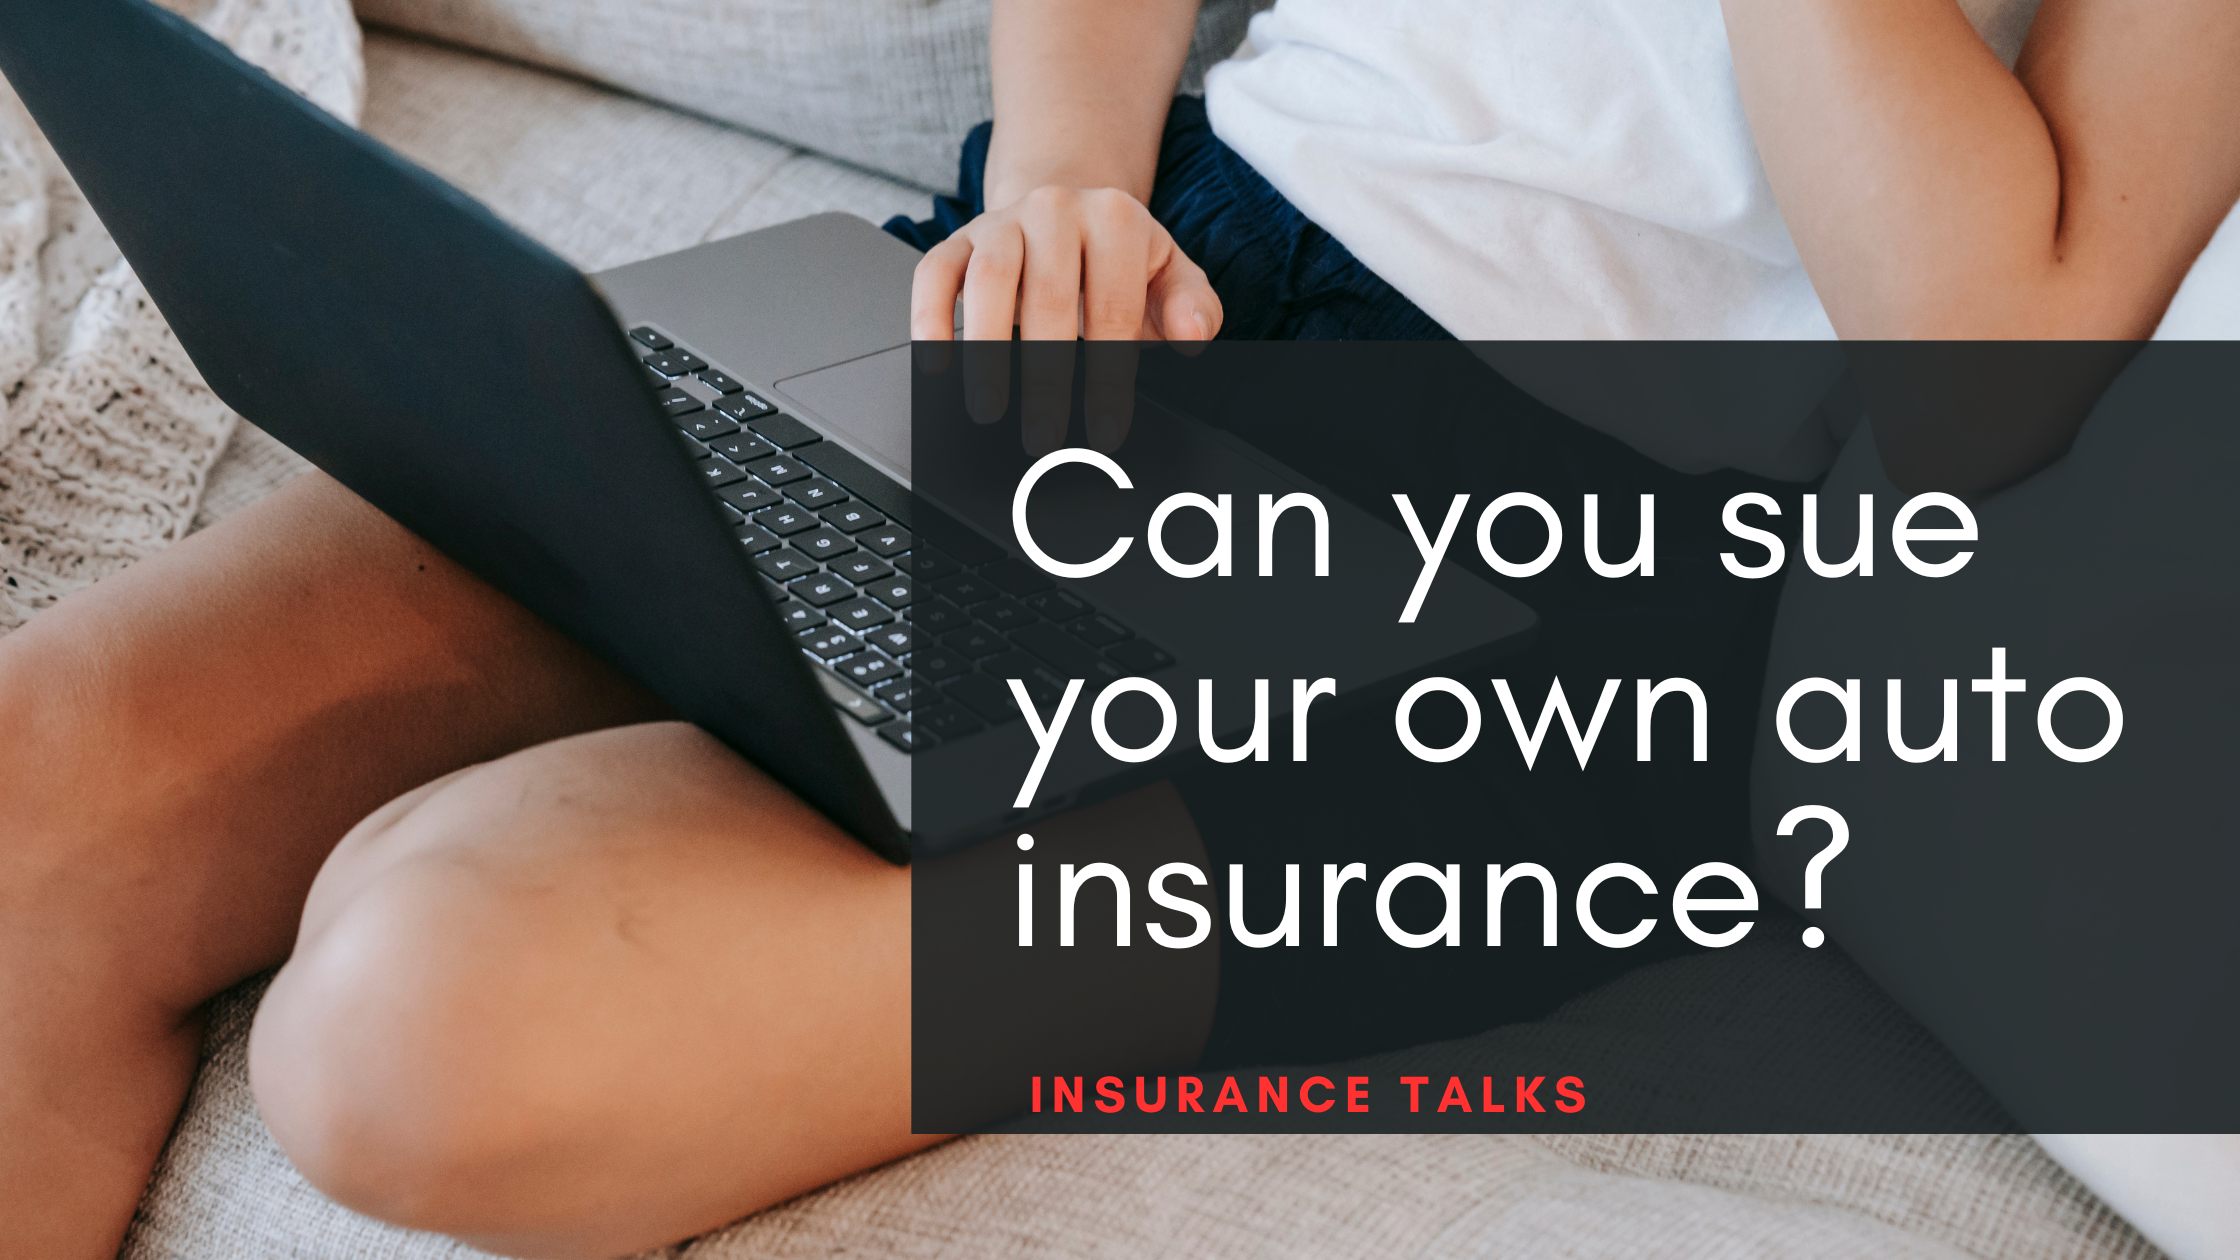 Can you sue your own auto insurance?